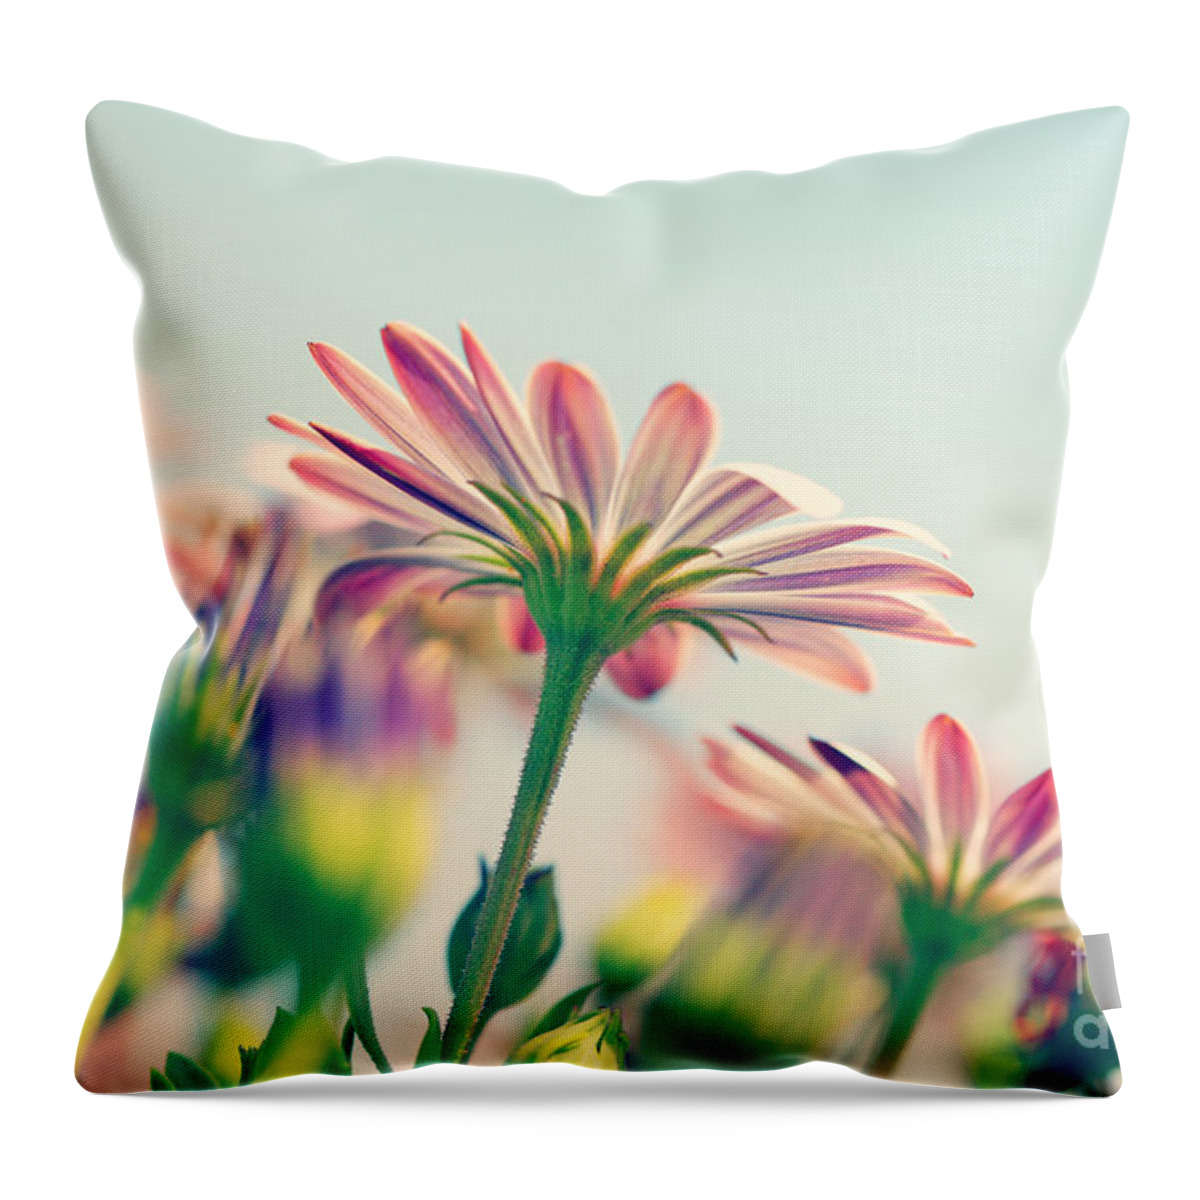 Abstract Throw Pillow featuring the photograph Daisy flower field by Anna Om